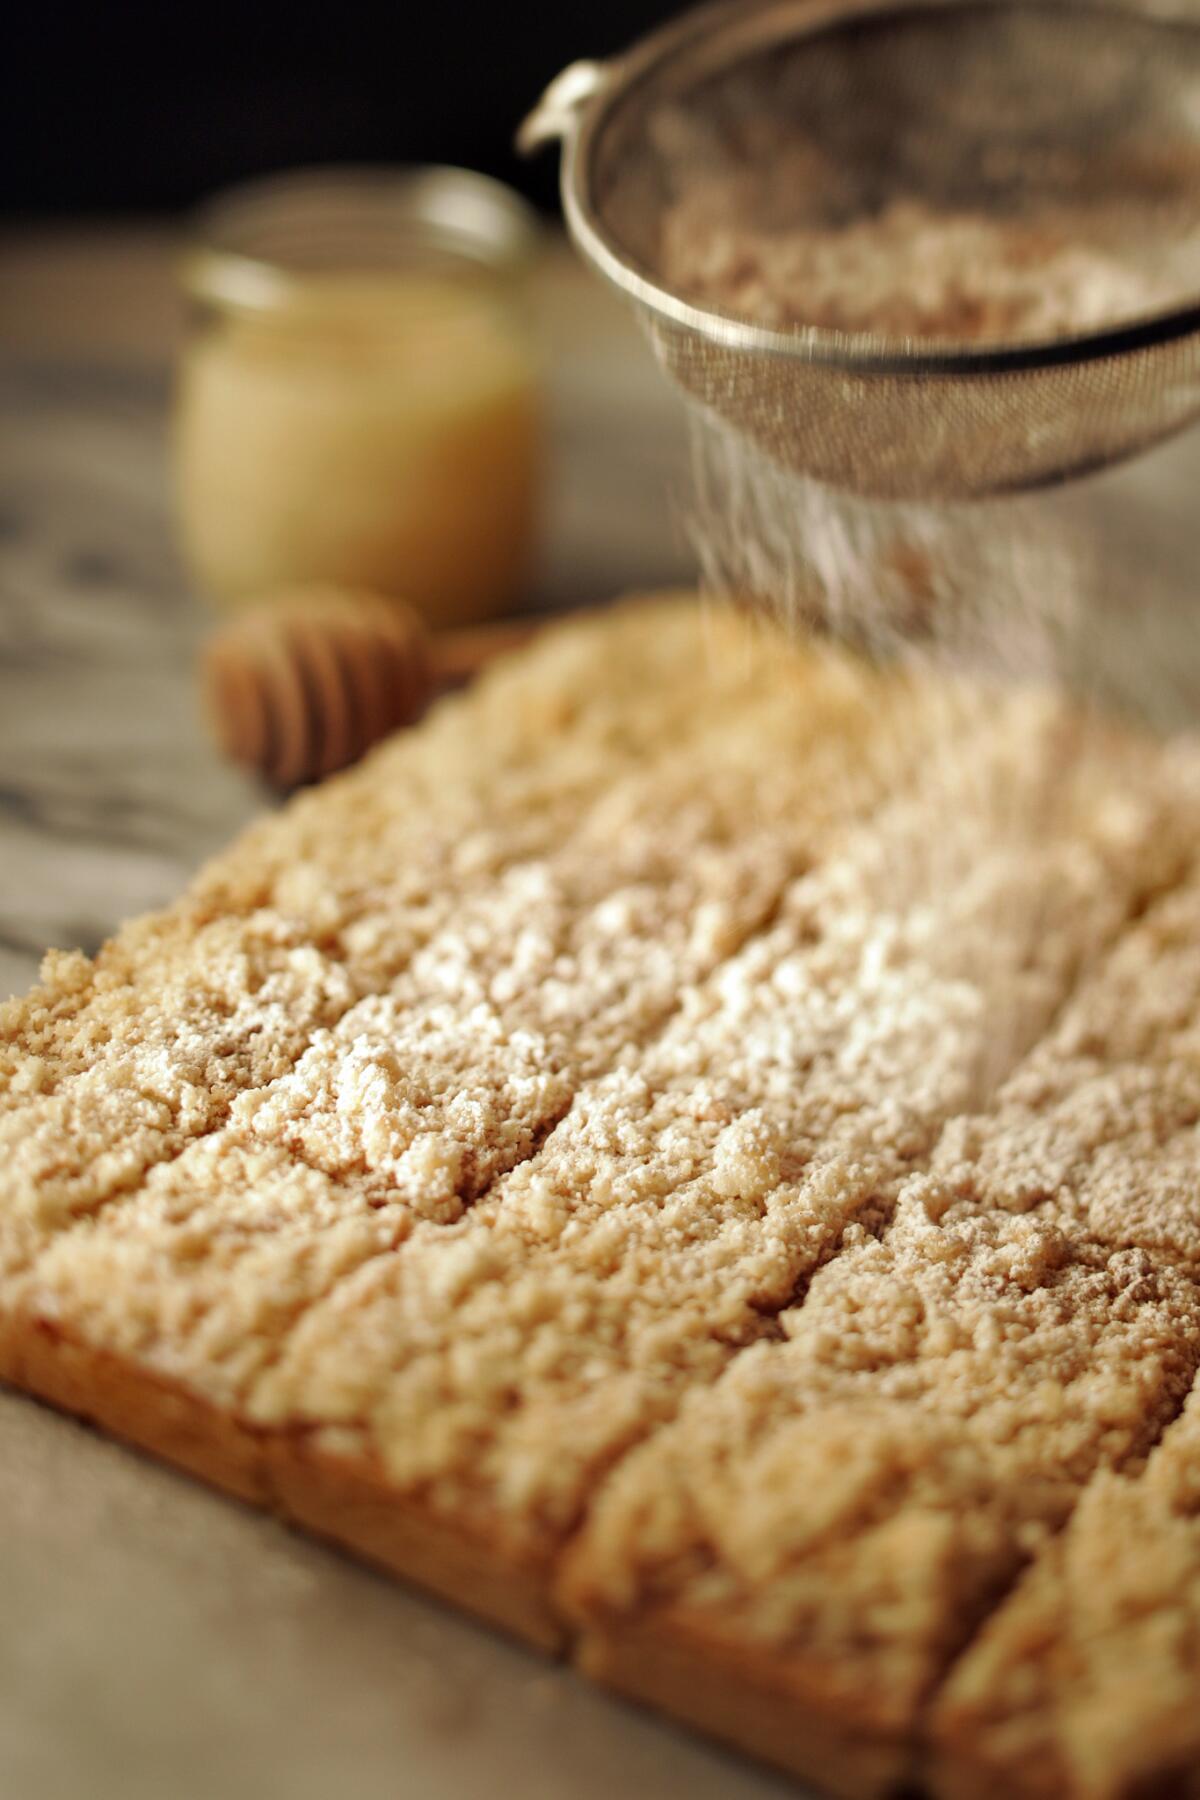 You'll have leftover crumble topping. Use it for sprinkling over ice cream.